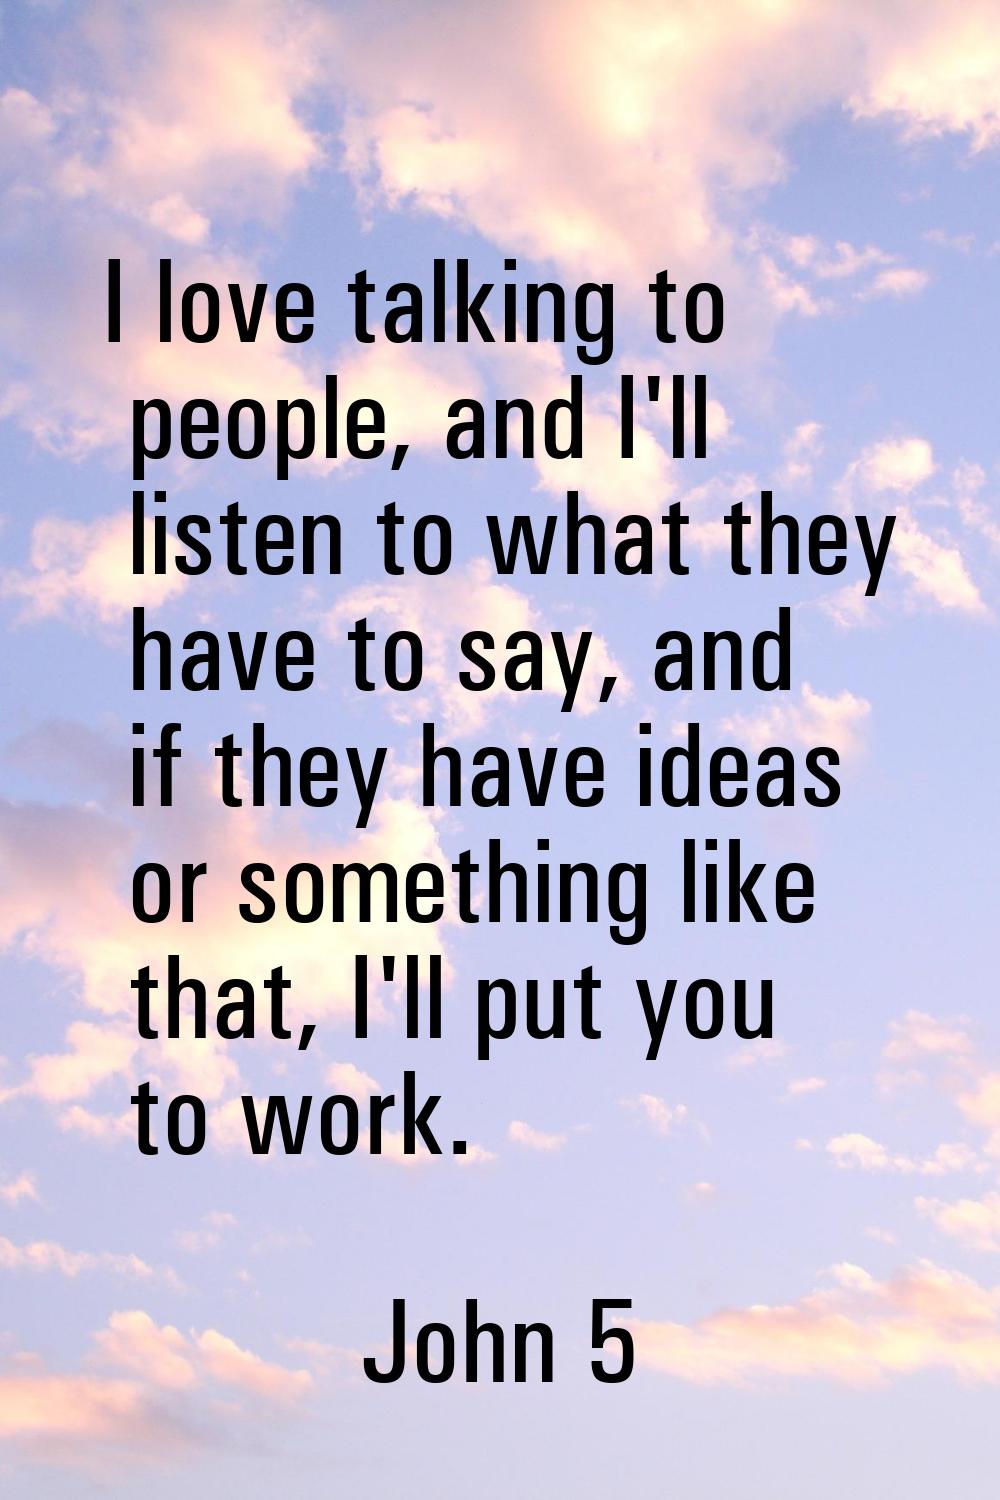 I love talking to people, and I'll listen to what they have to say, and if they have ideas or somet